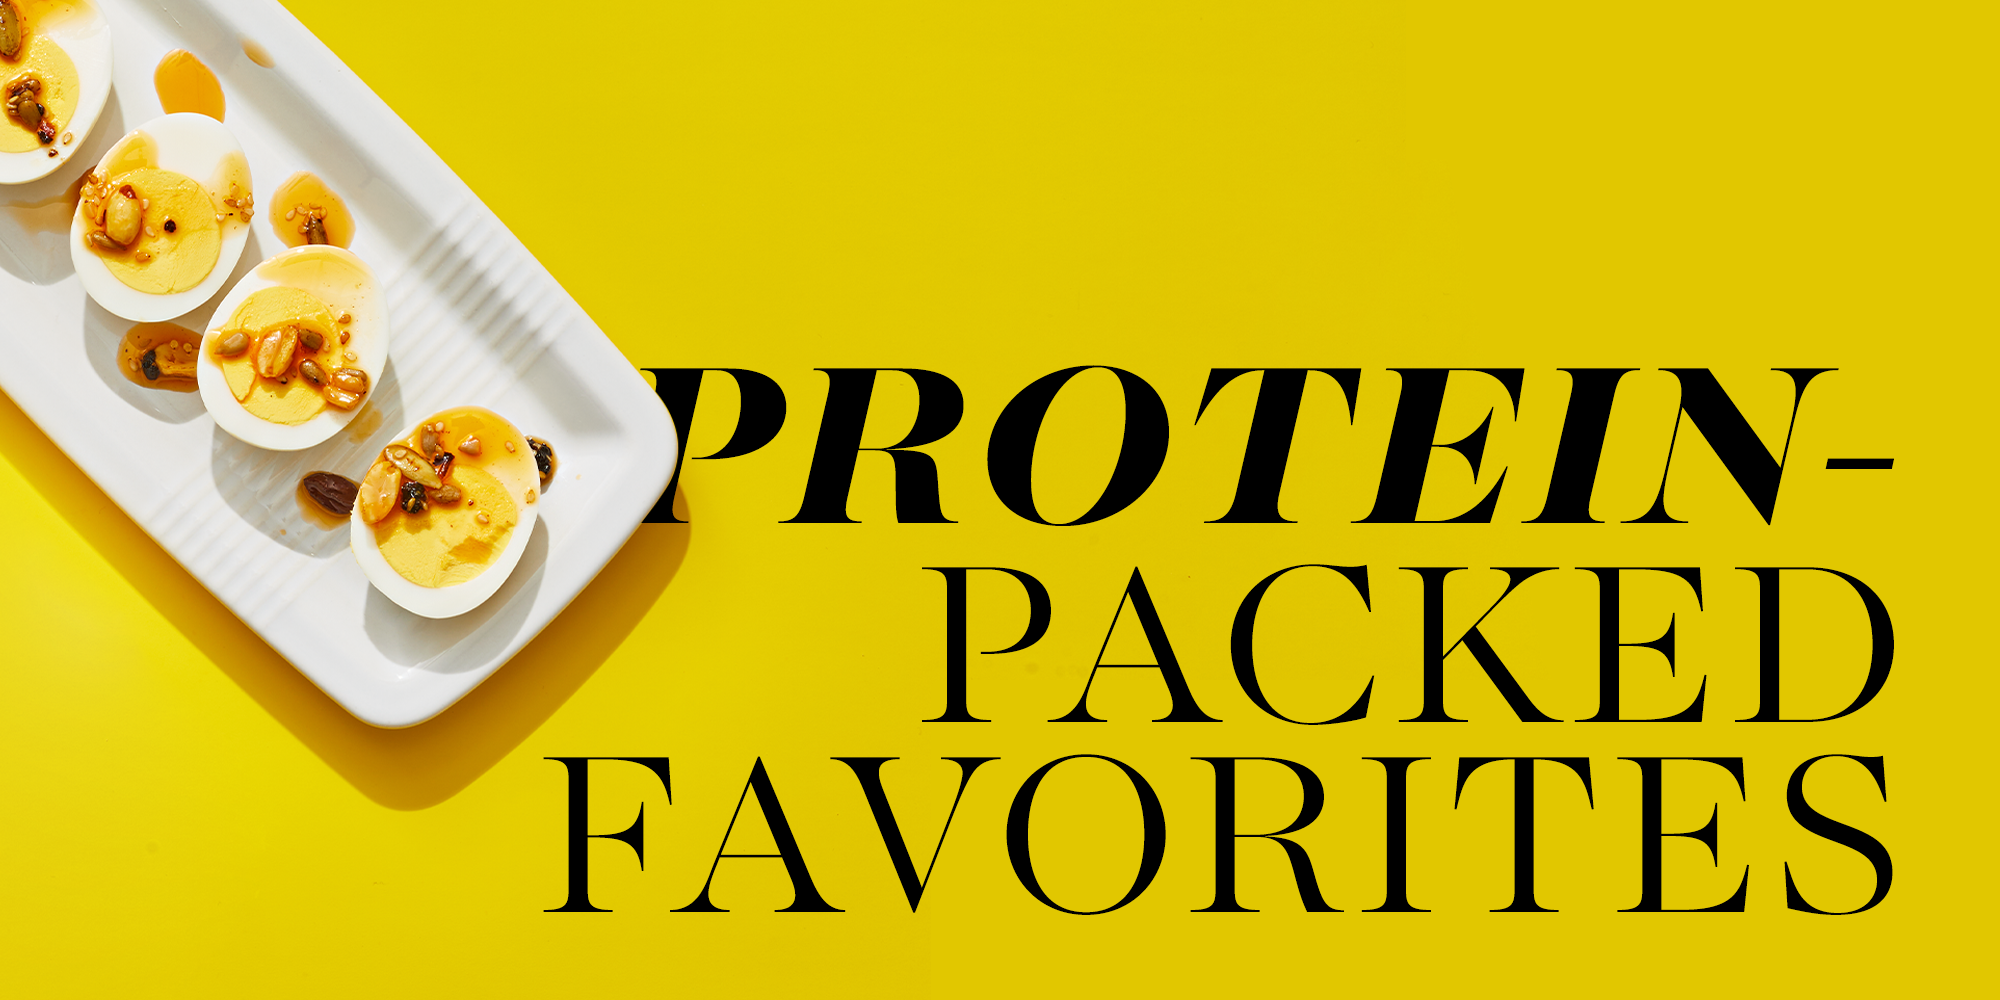 protein packed favorites